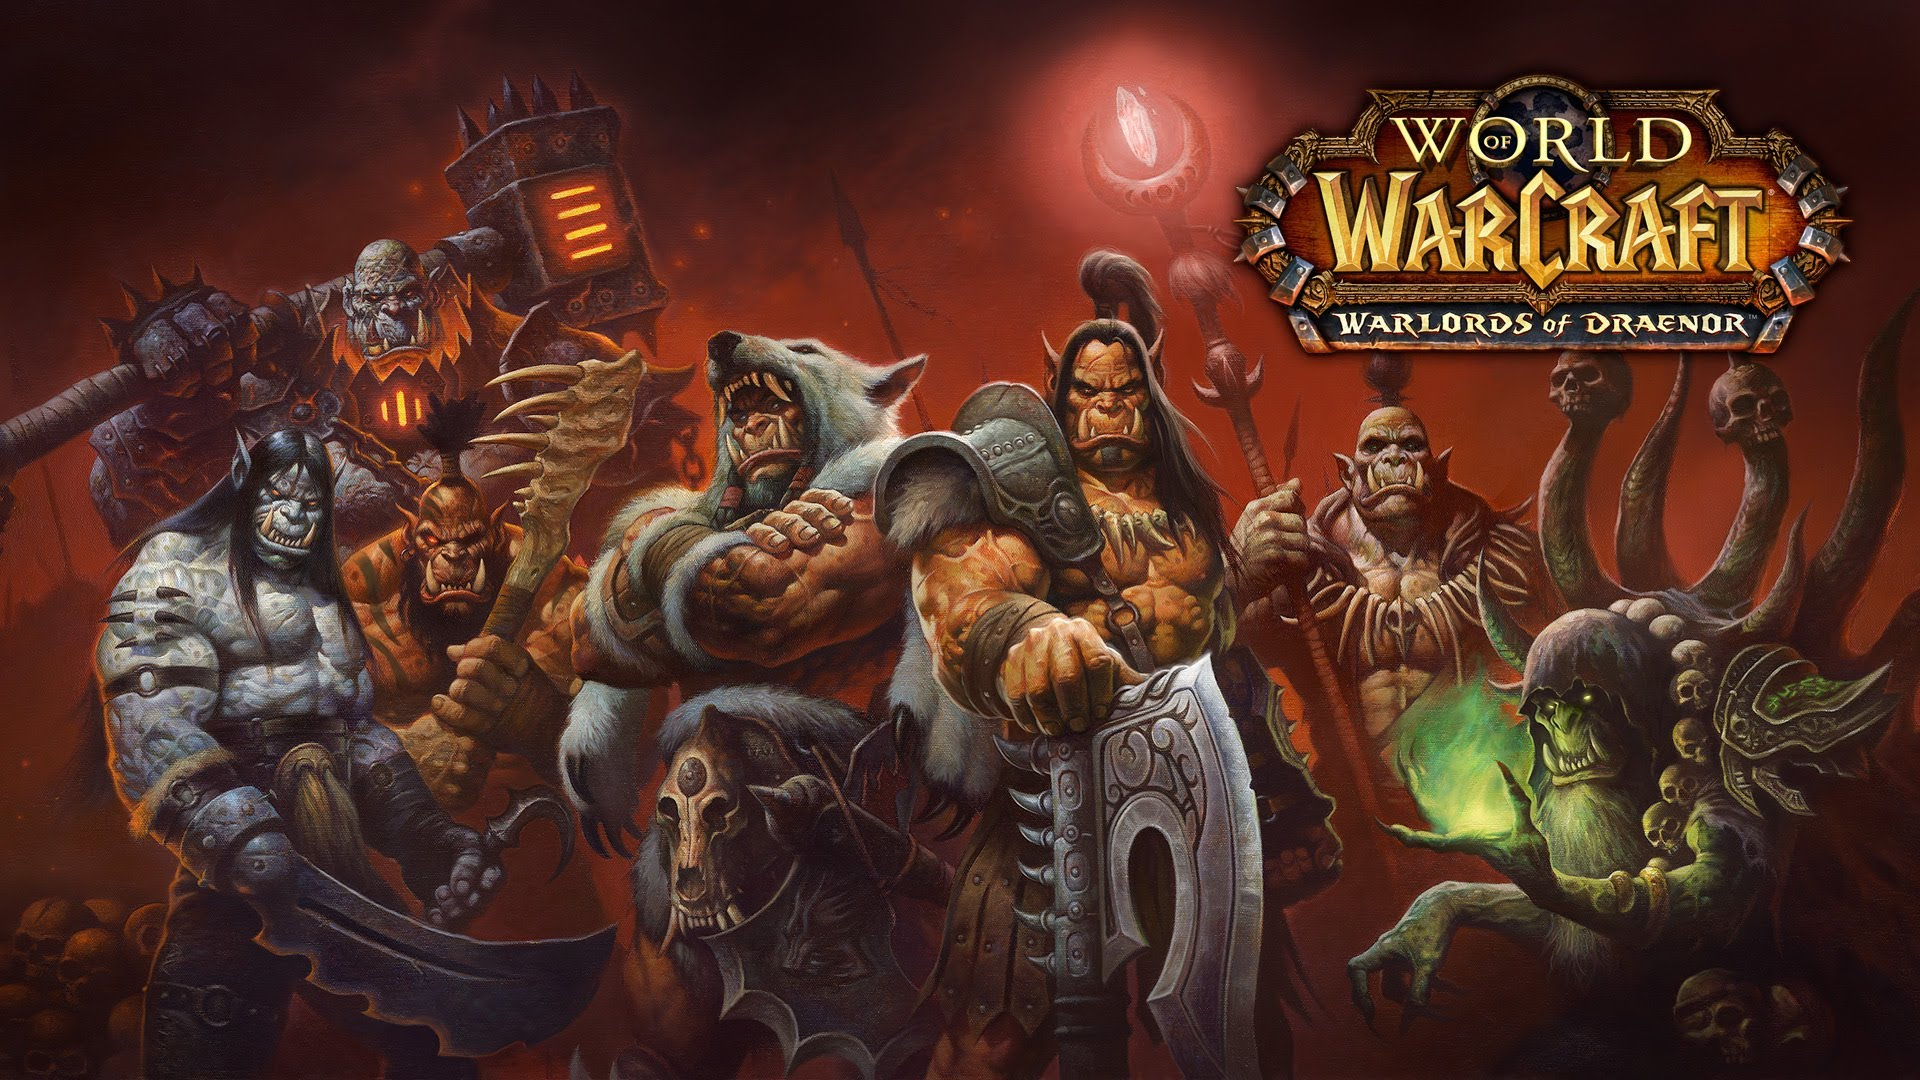 1920x1080 Warlords of Draenor wallpaper image Orc clan and Orks fantasy and monsters fan group Mod DB